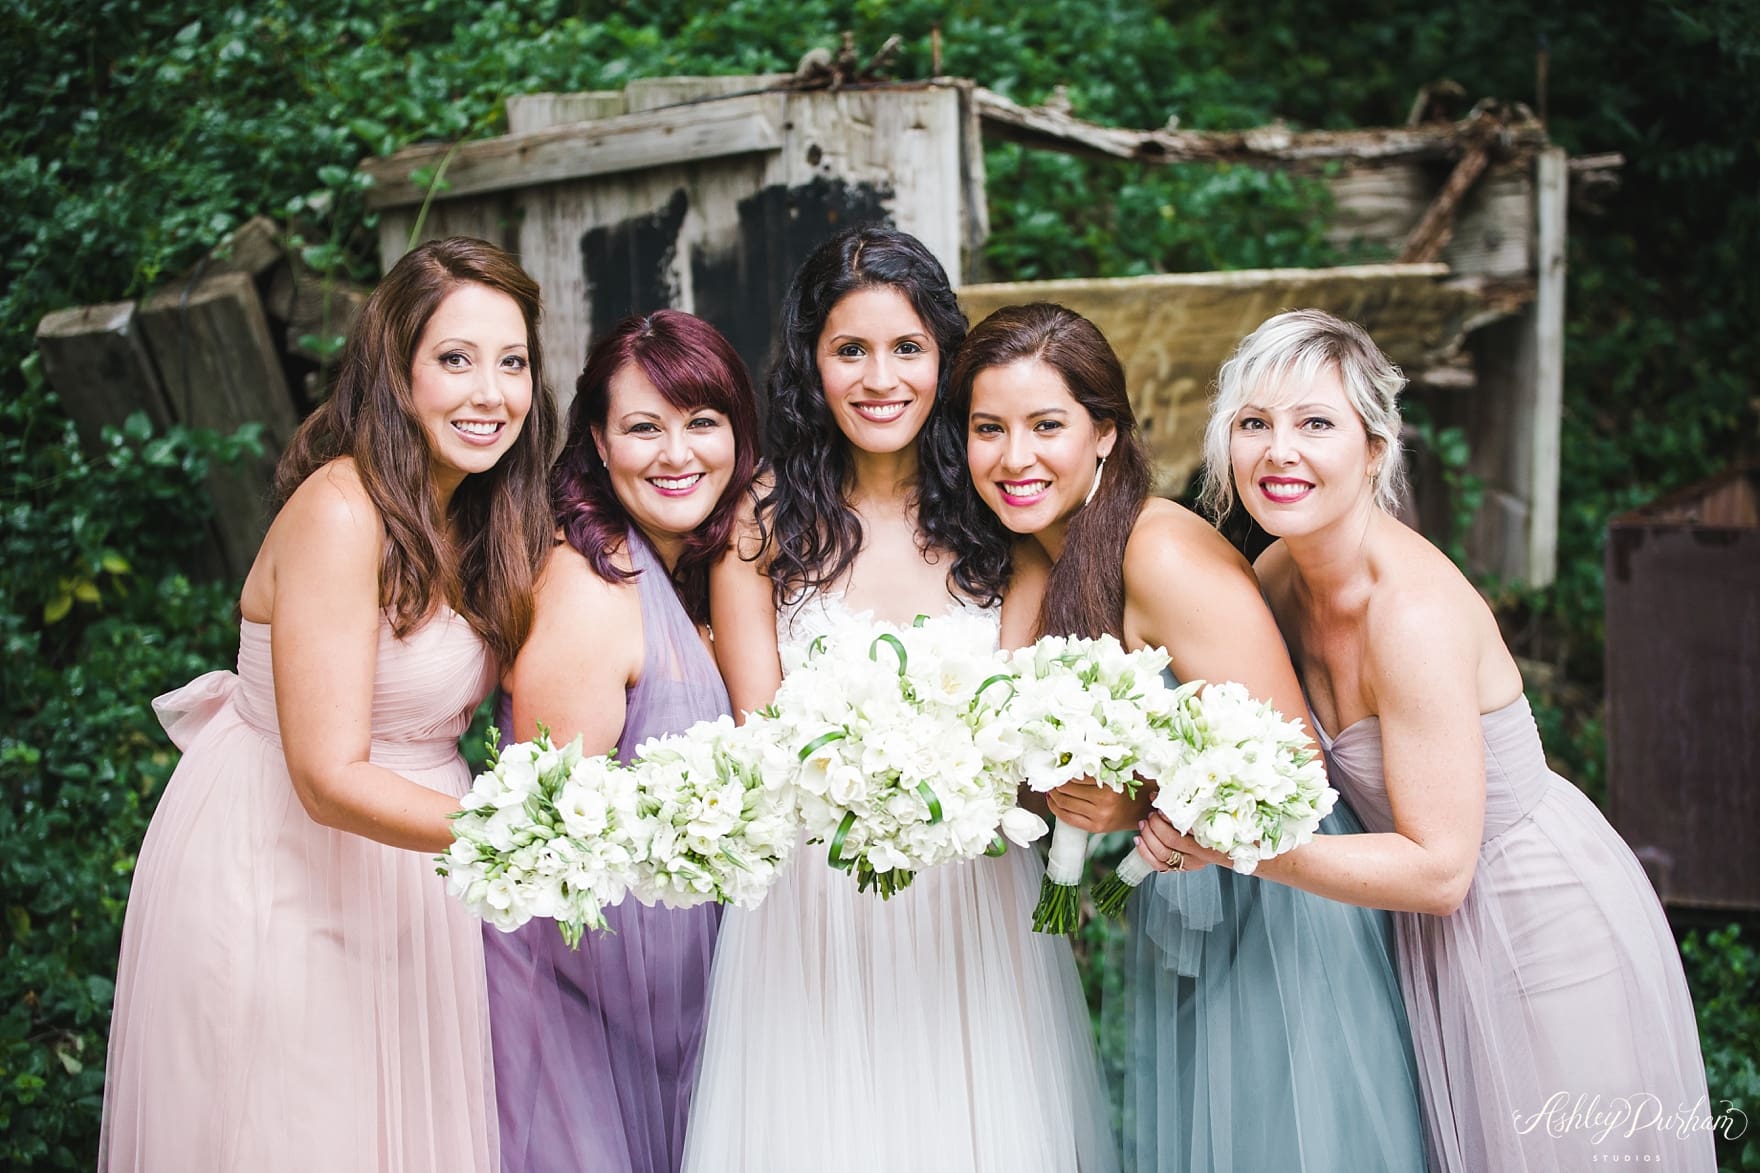 Green mountain ranch weddings, multicolored bridesmaid dresses, tulle wedding dress, tulle bridesmaid dresses